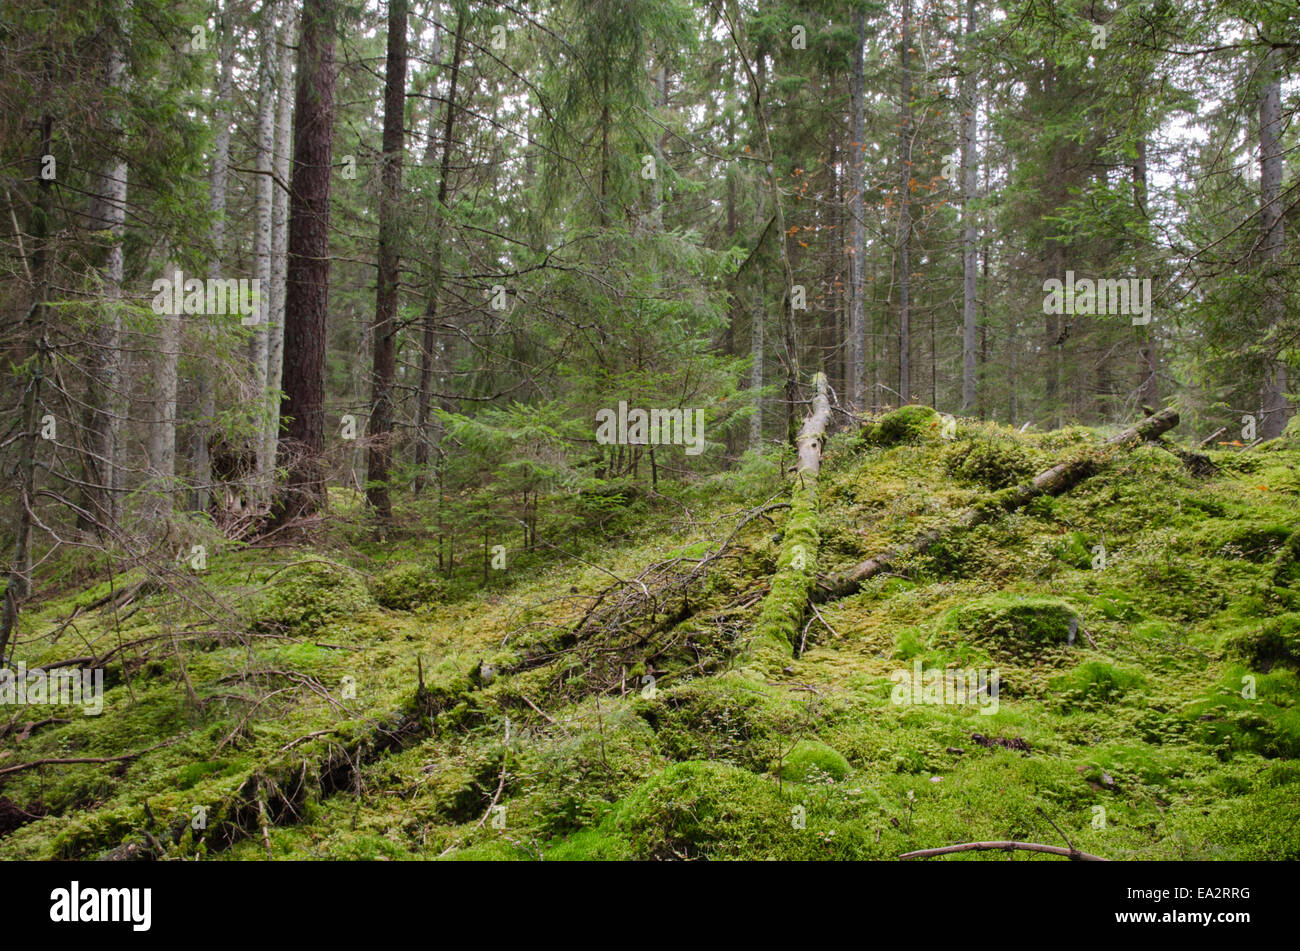 A mossy, untouched and old-growth coniferous forest in sweden Stock Photo